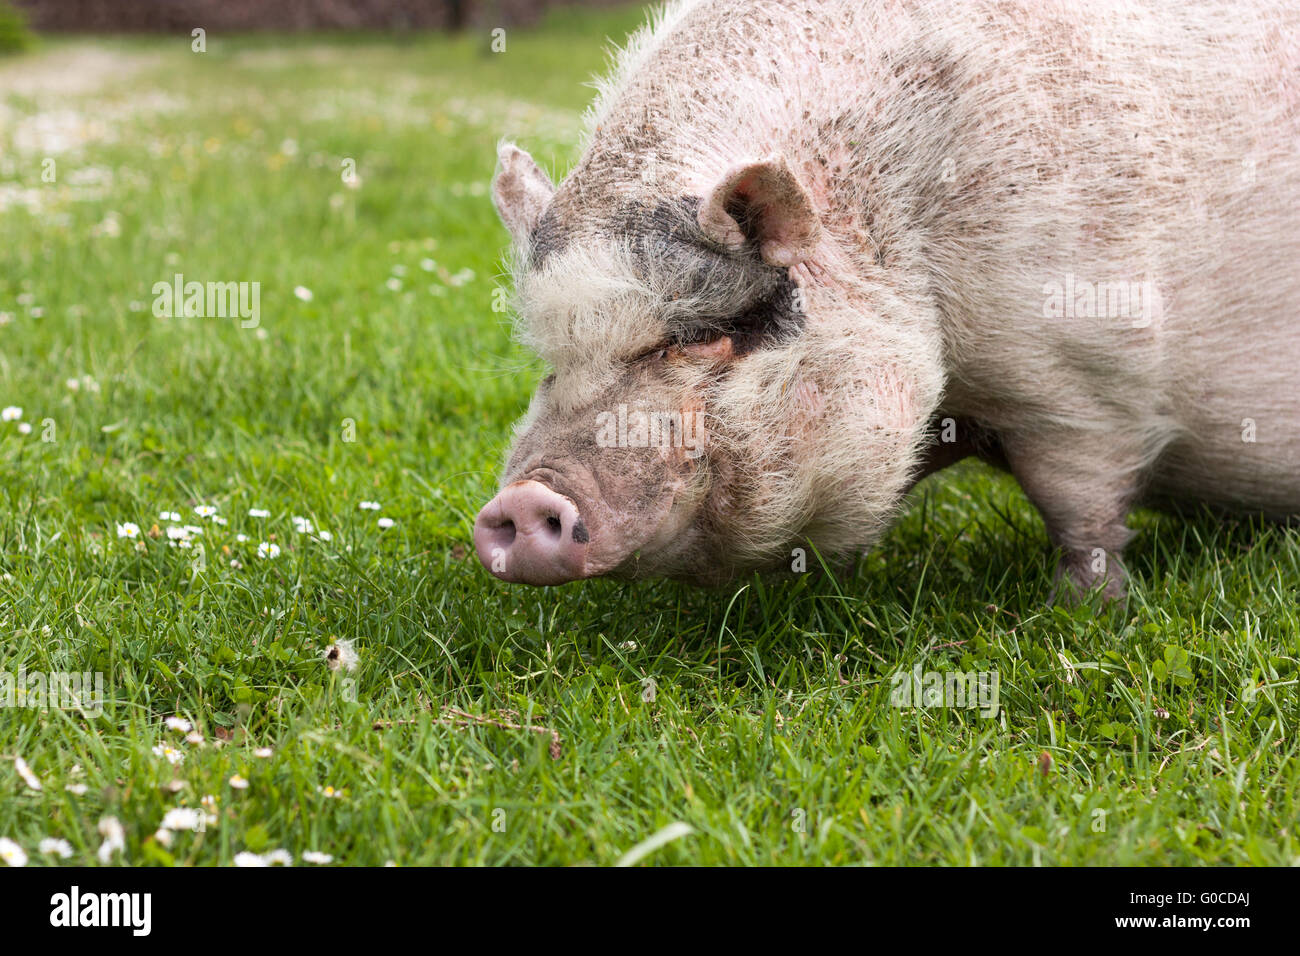 Pig in the grass Stock Photo